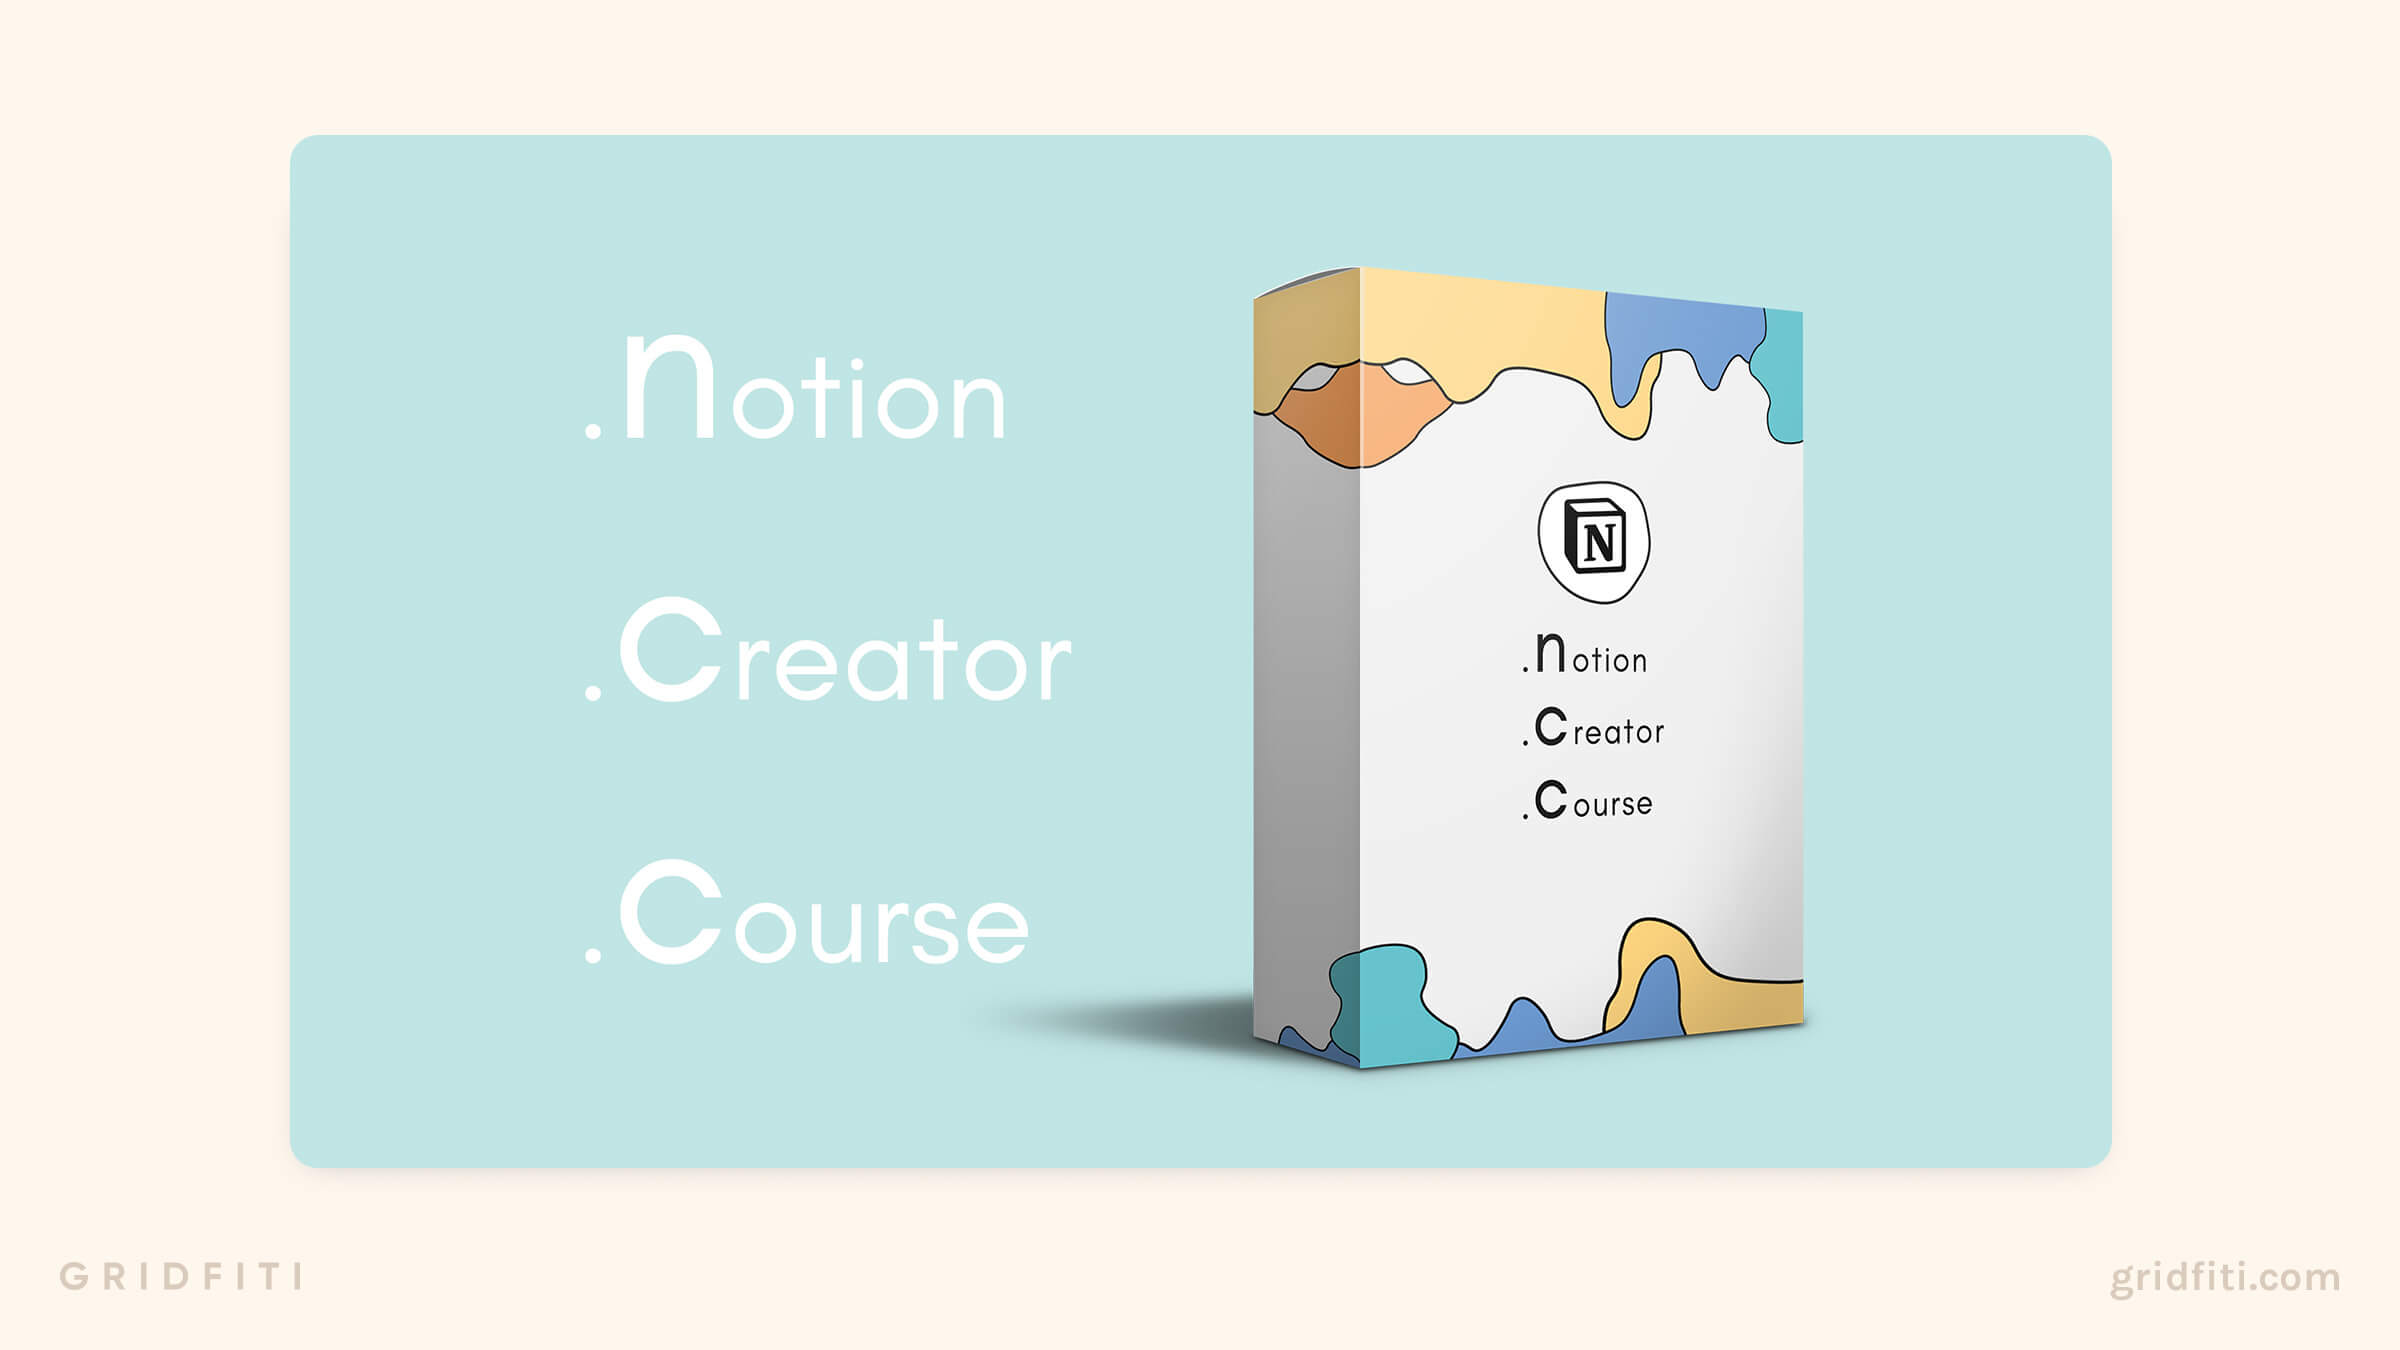 Notion Creator Course – How to Sell Notion Templates